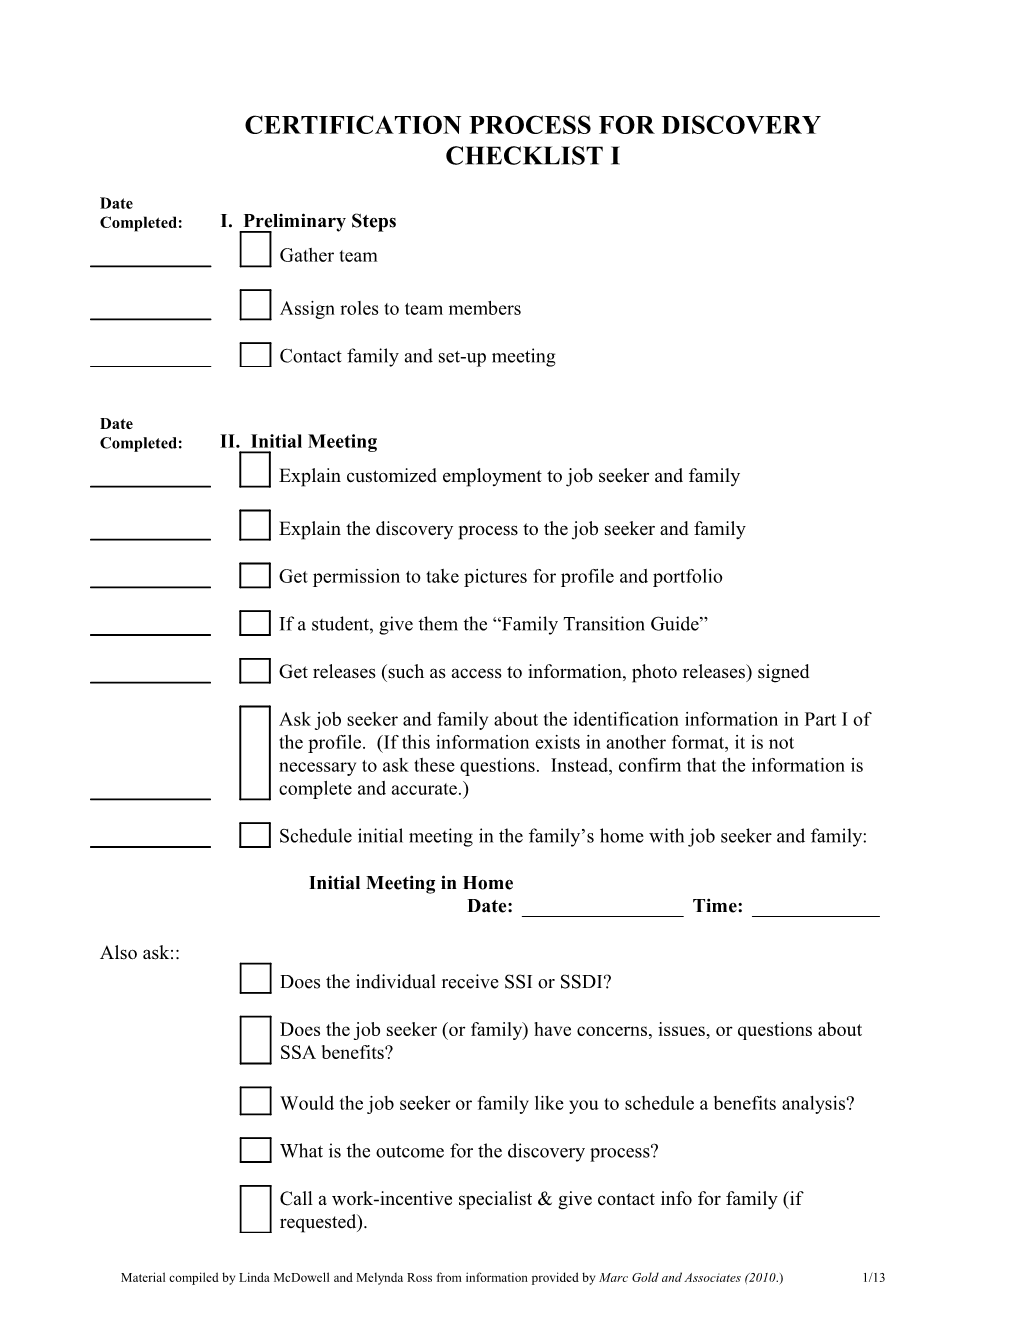 Customized Employment Checklist I: Discovery